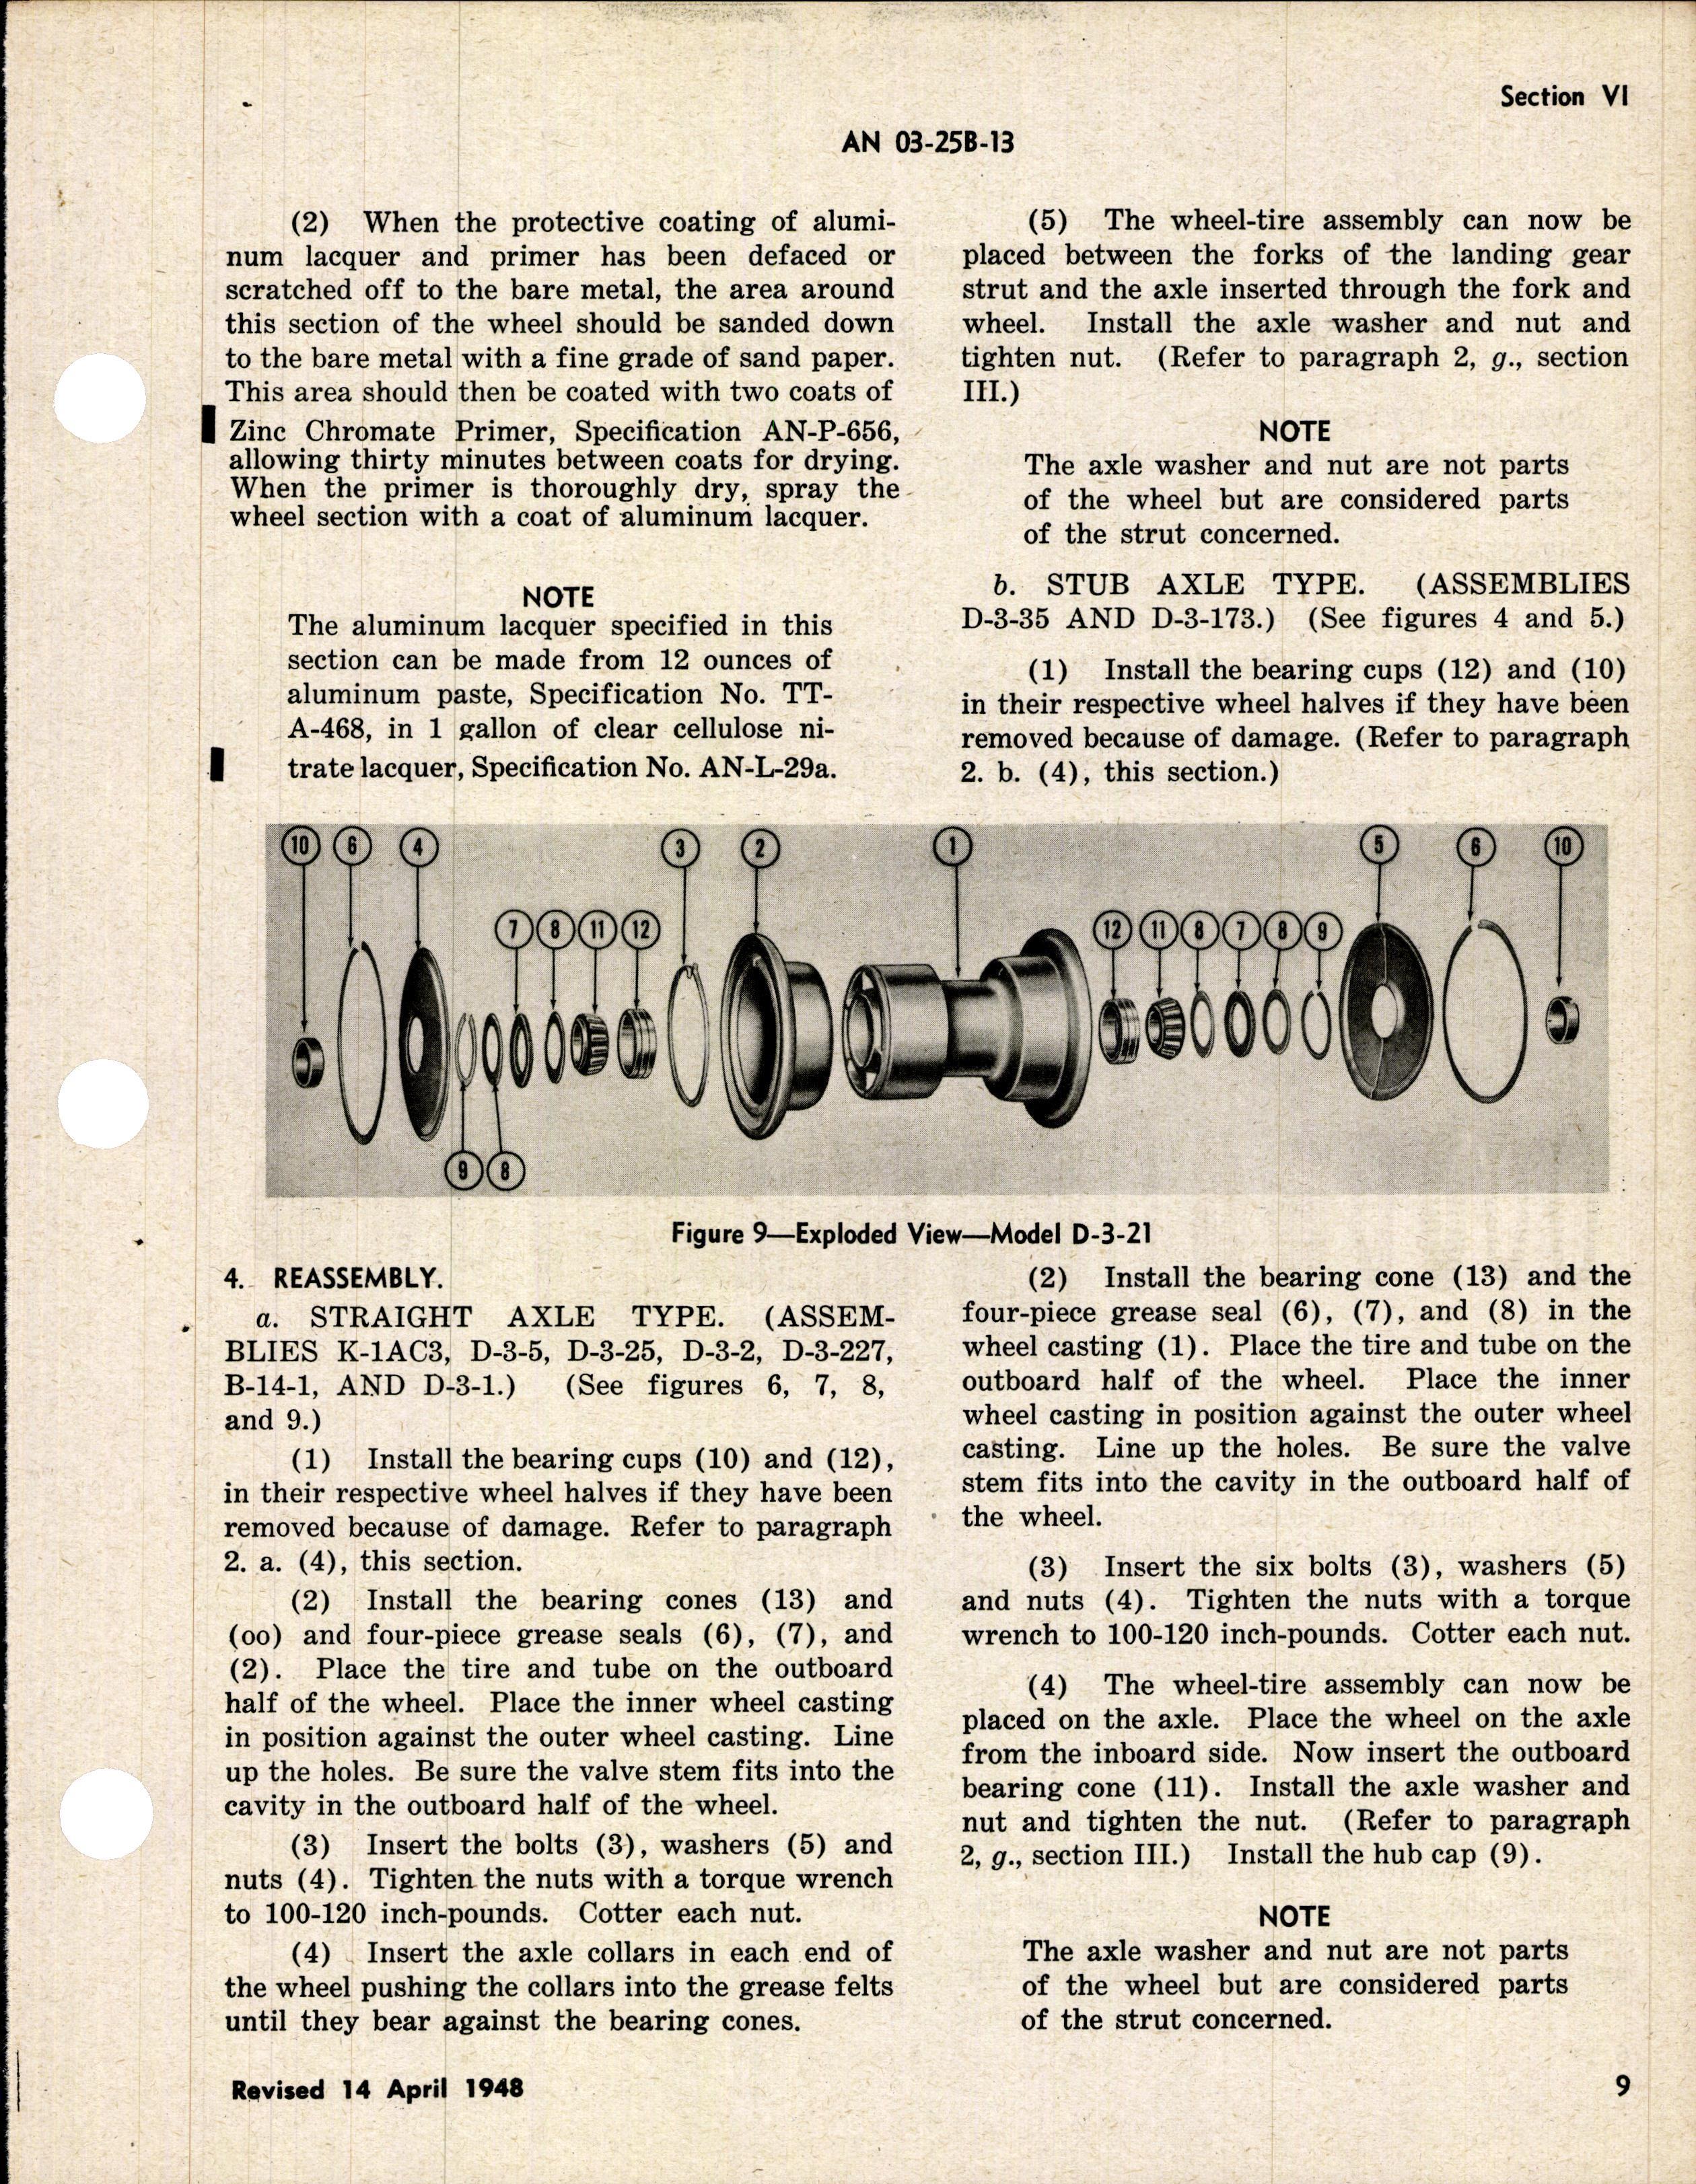 Sample page 5 from AirCorps Library document: Operation, Service, & Overhaul Instructions with Parts Catalog for Low Pressure Tail Wheels